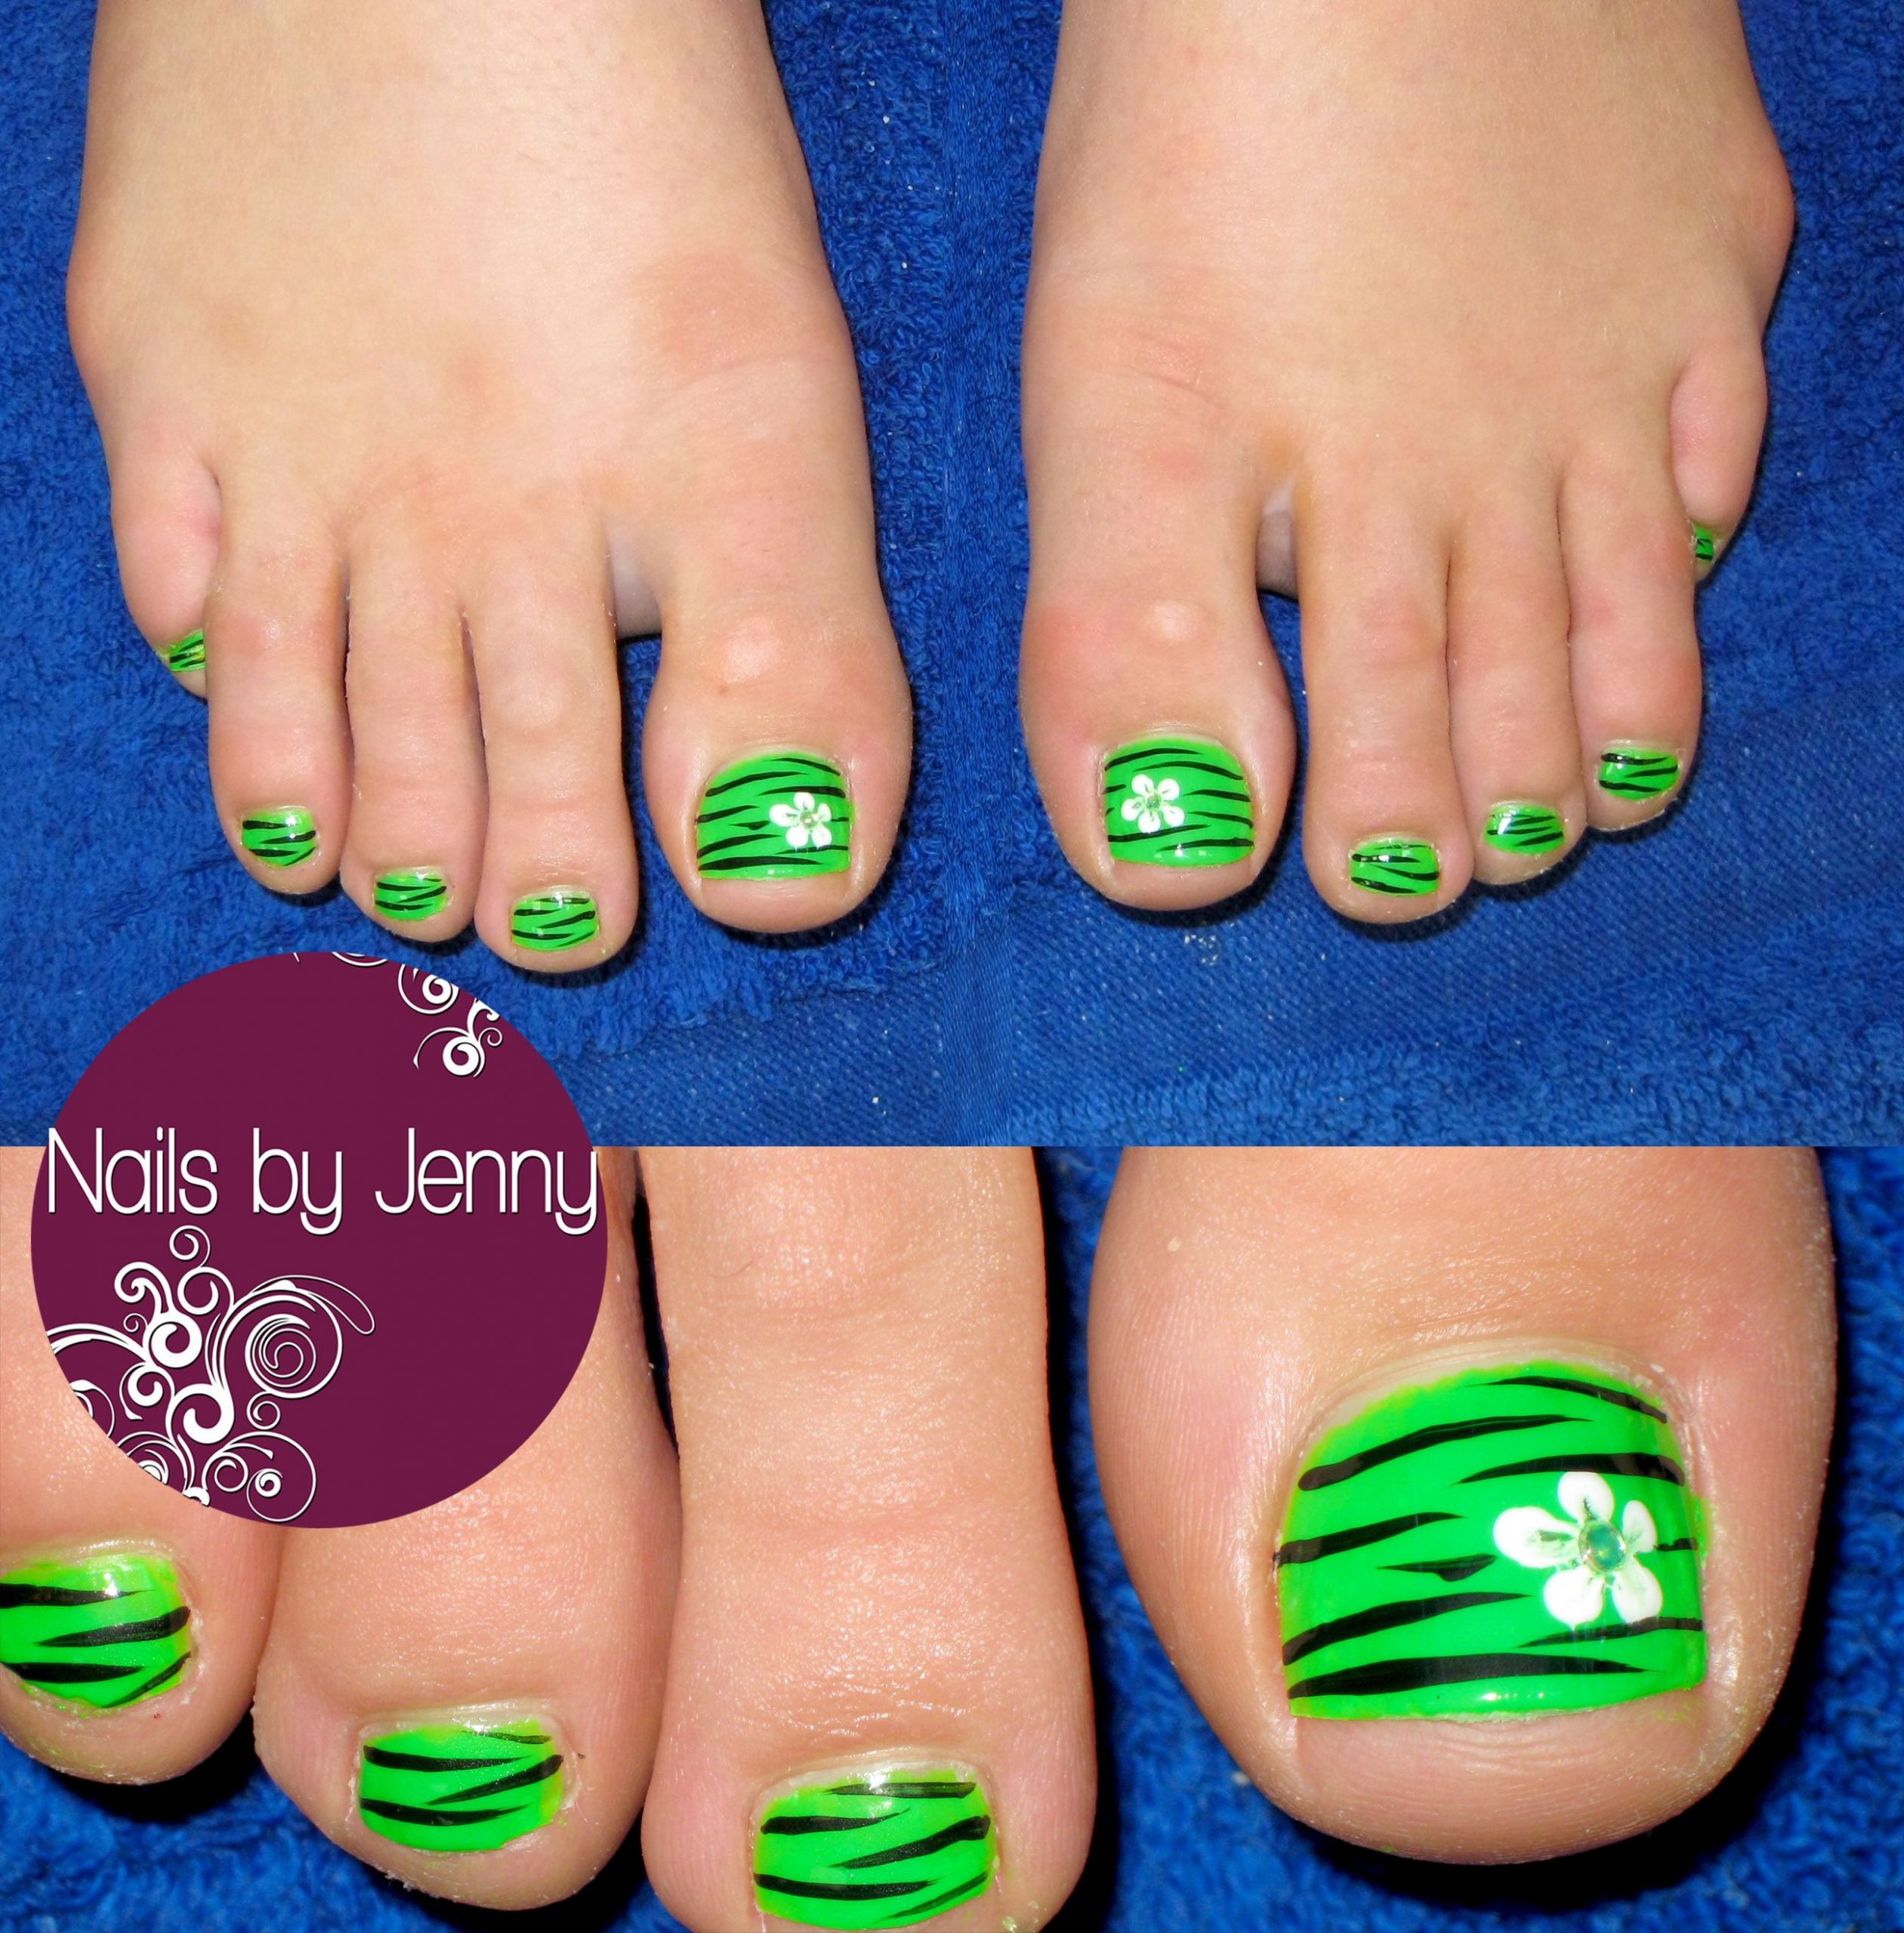 Green Toe Nail Designs
 Lime green Pedicure with Flowers and Zebra Stripes